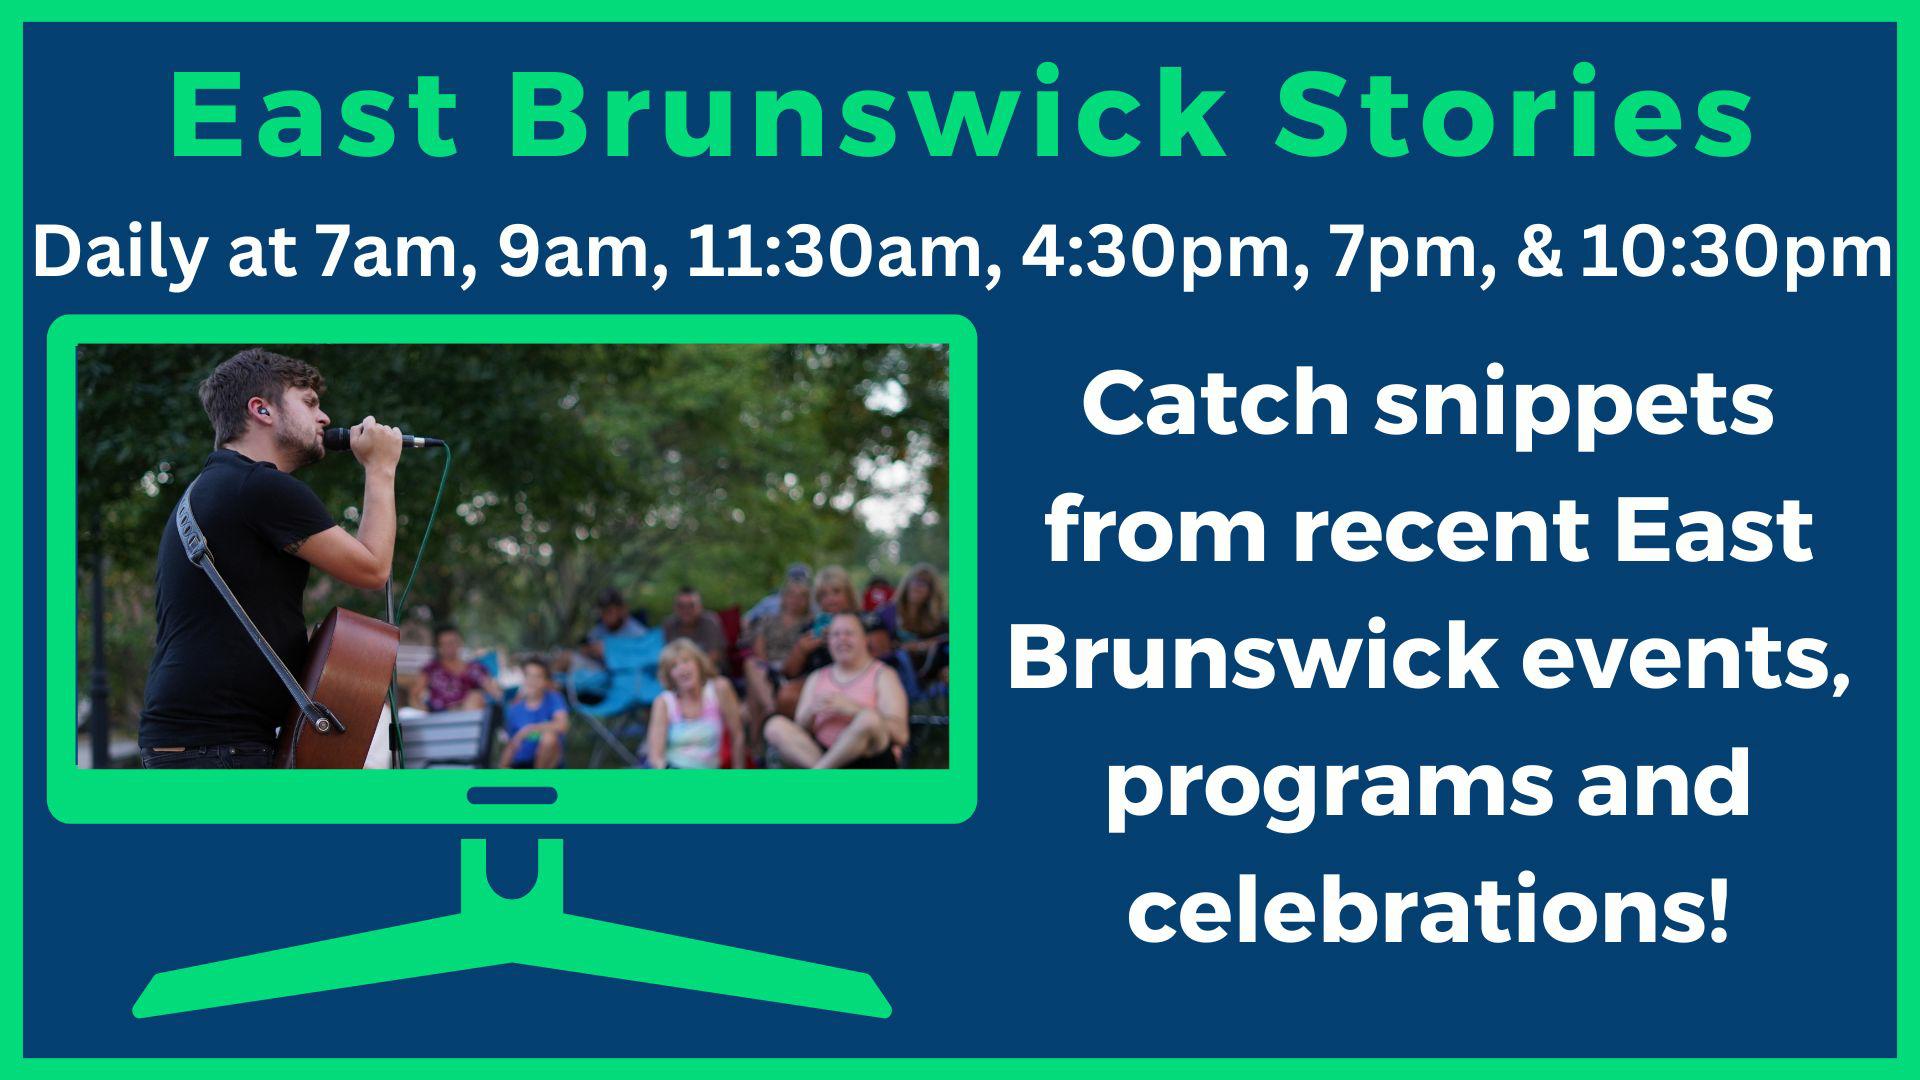 East Brunswick Stories airs on EBTV daily at 7am, 9am, 11:30am, 4:30pm, 7pm and 10:30pm